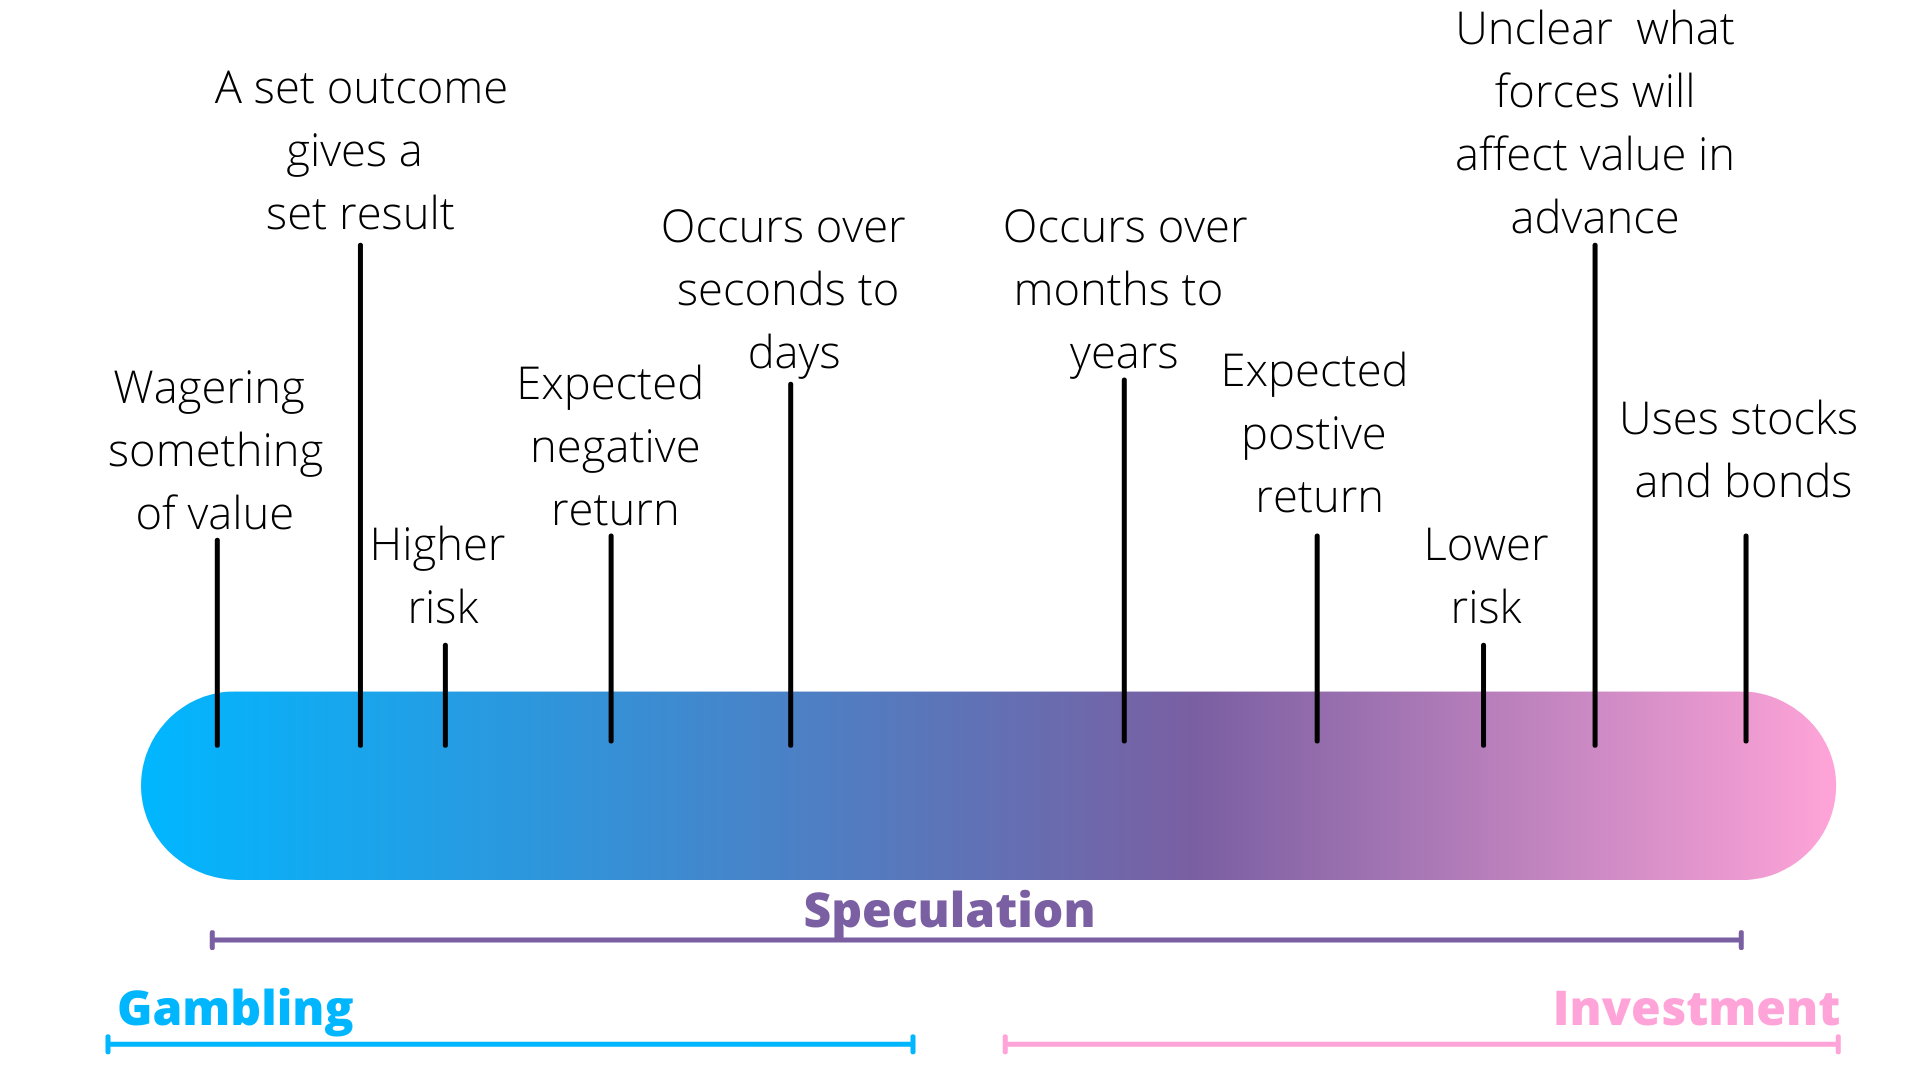 Blue-purple.pngnk spectrum showing the behaviors and characteristics of gambling, speculation, and investment. Image shows that speculation exists as a middle ground, sharing many common attributes with both gambling and investment, which do not overlap with one another.